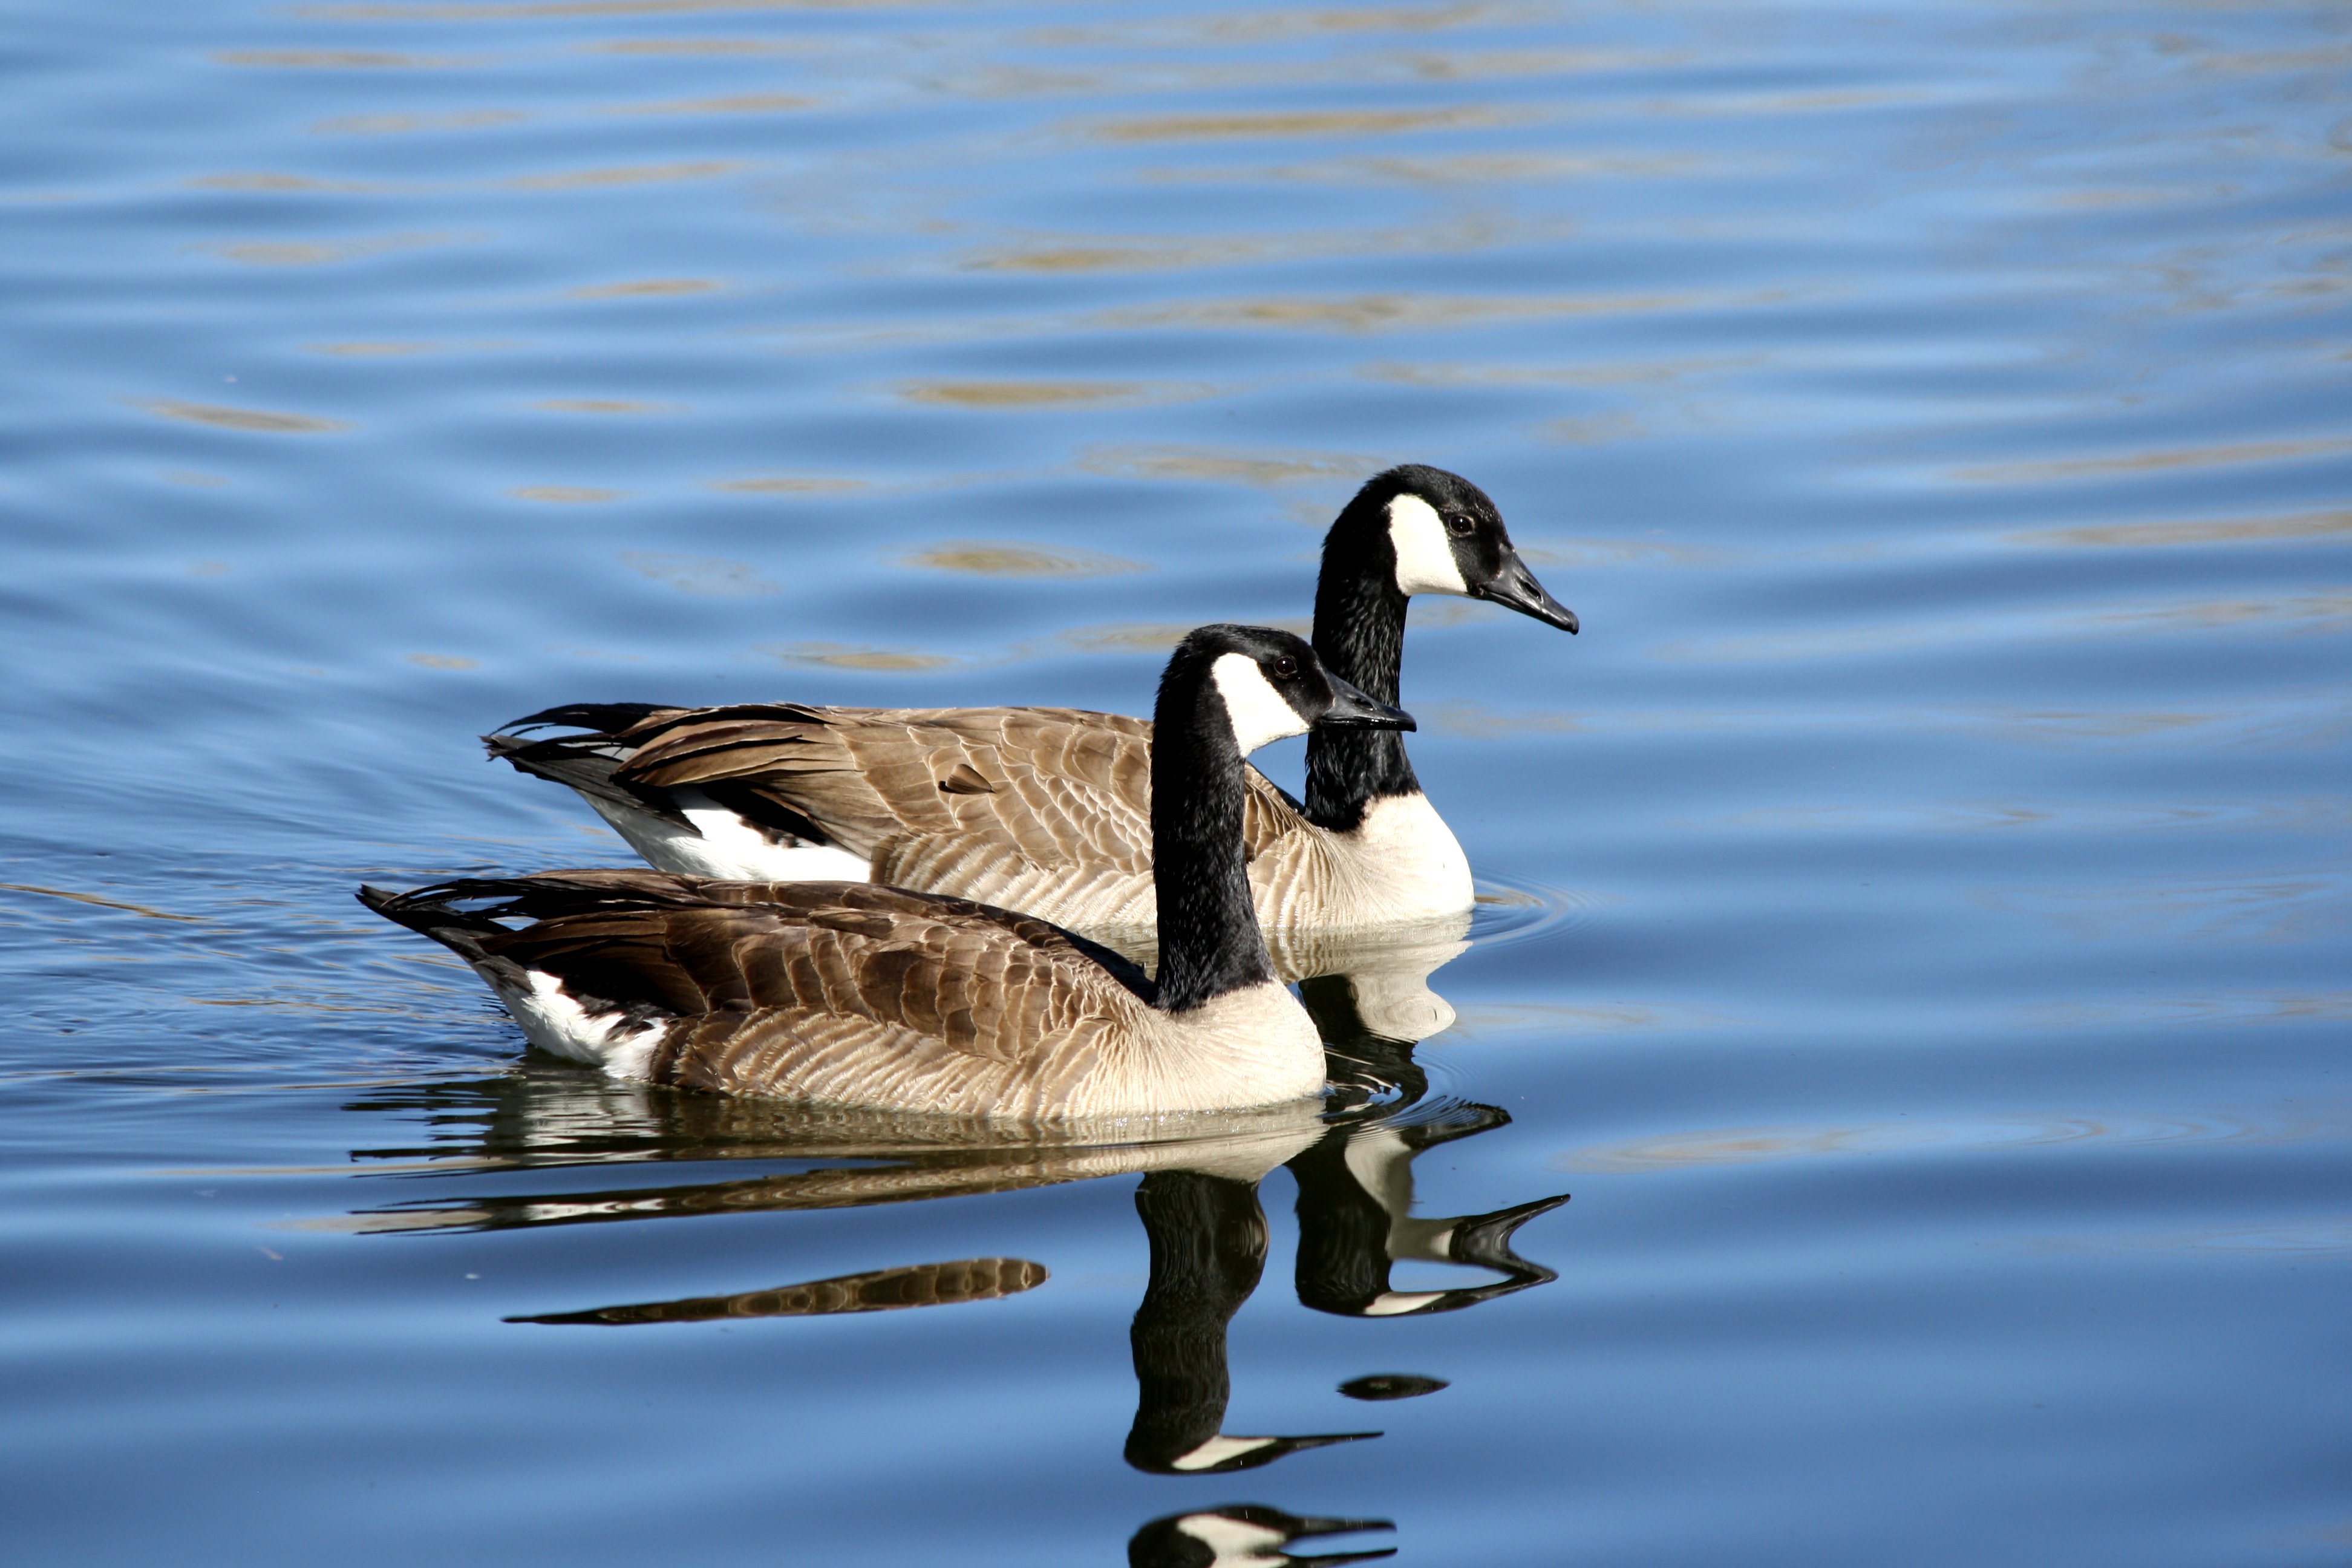 Canadian Geese in Blue Water Picture | Free Photograph | Photos ...